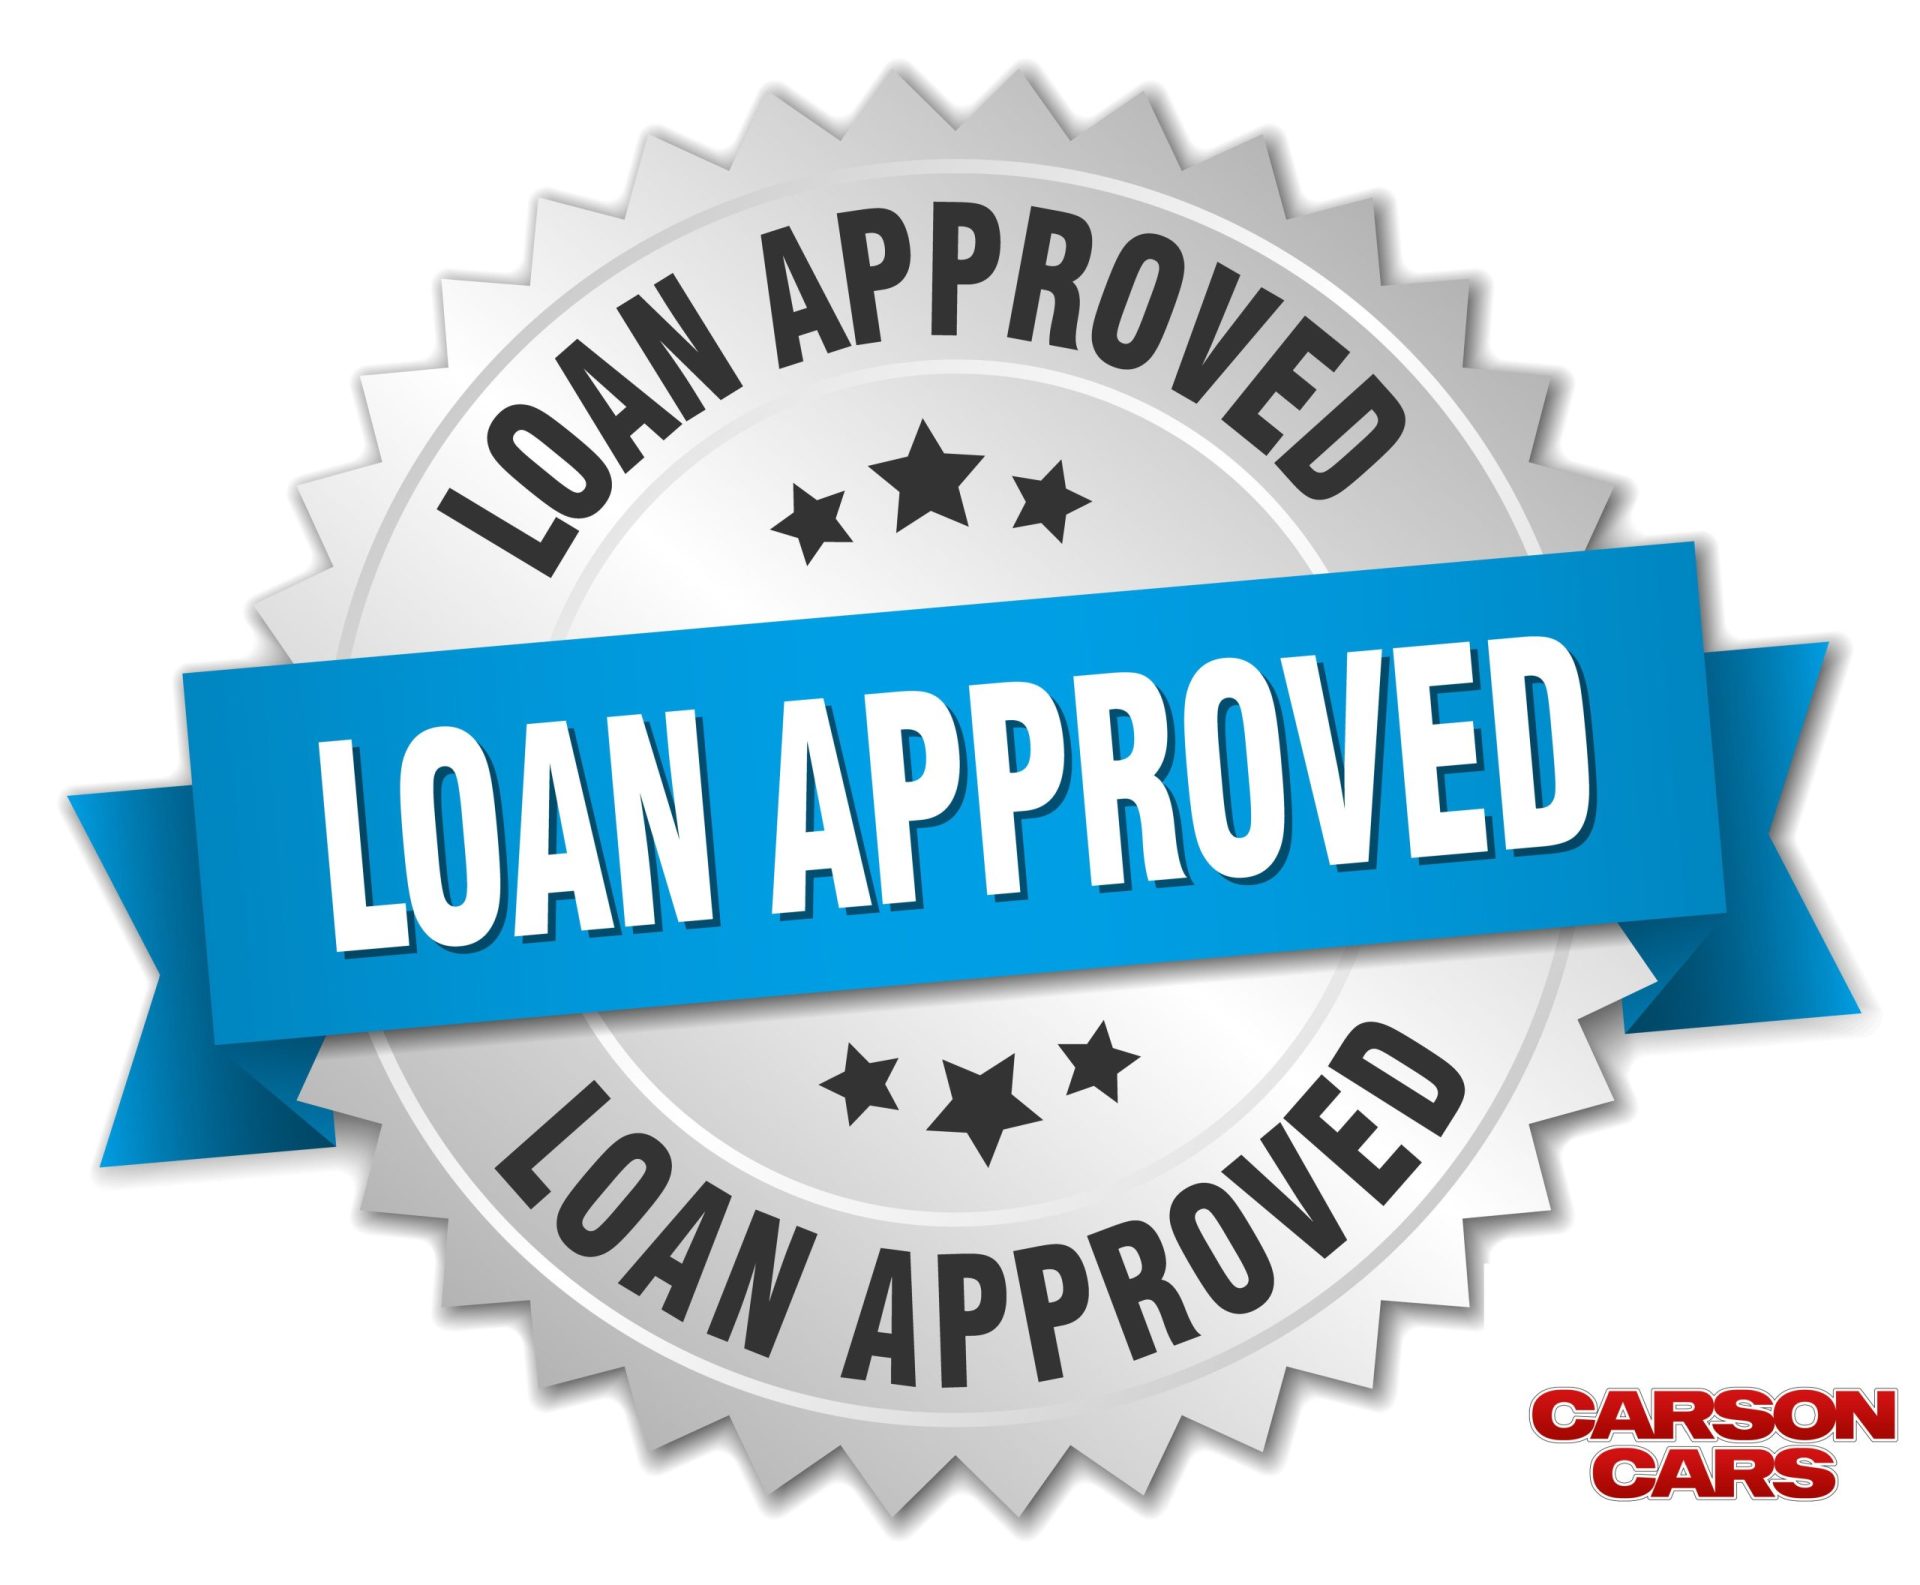 Auto Financing Near Edmonds for Every Type of Buyer